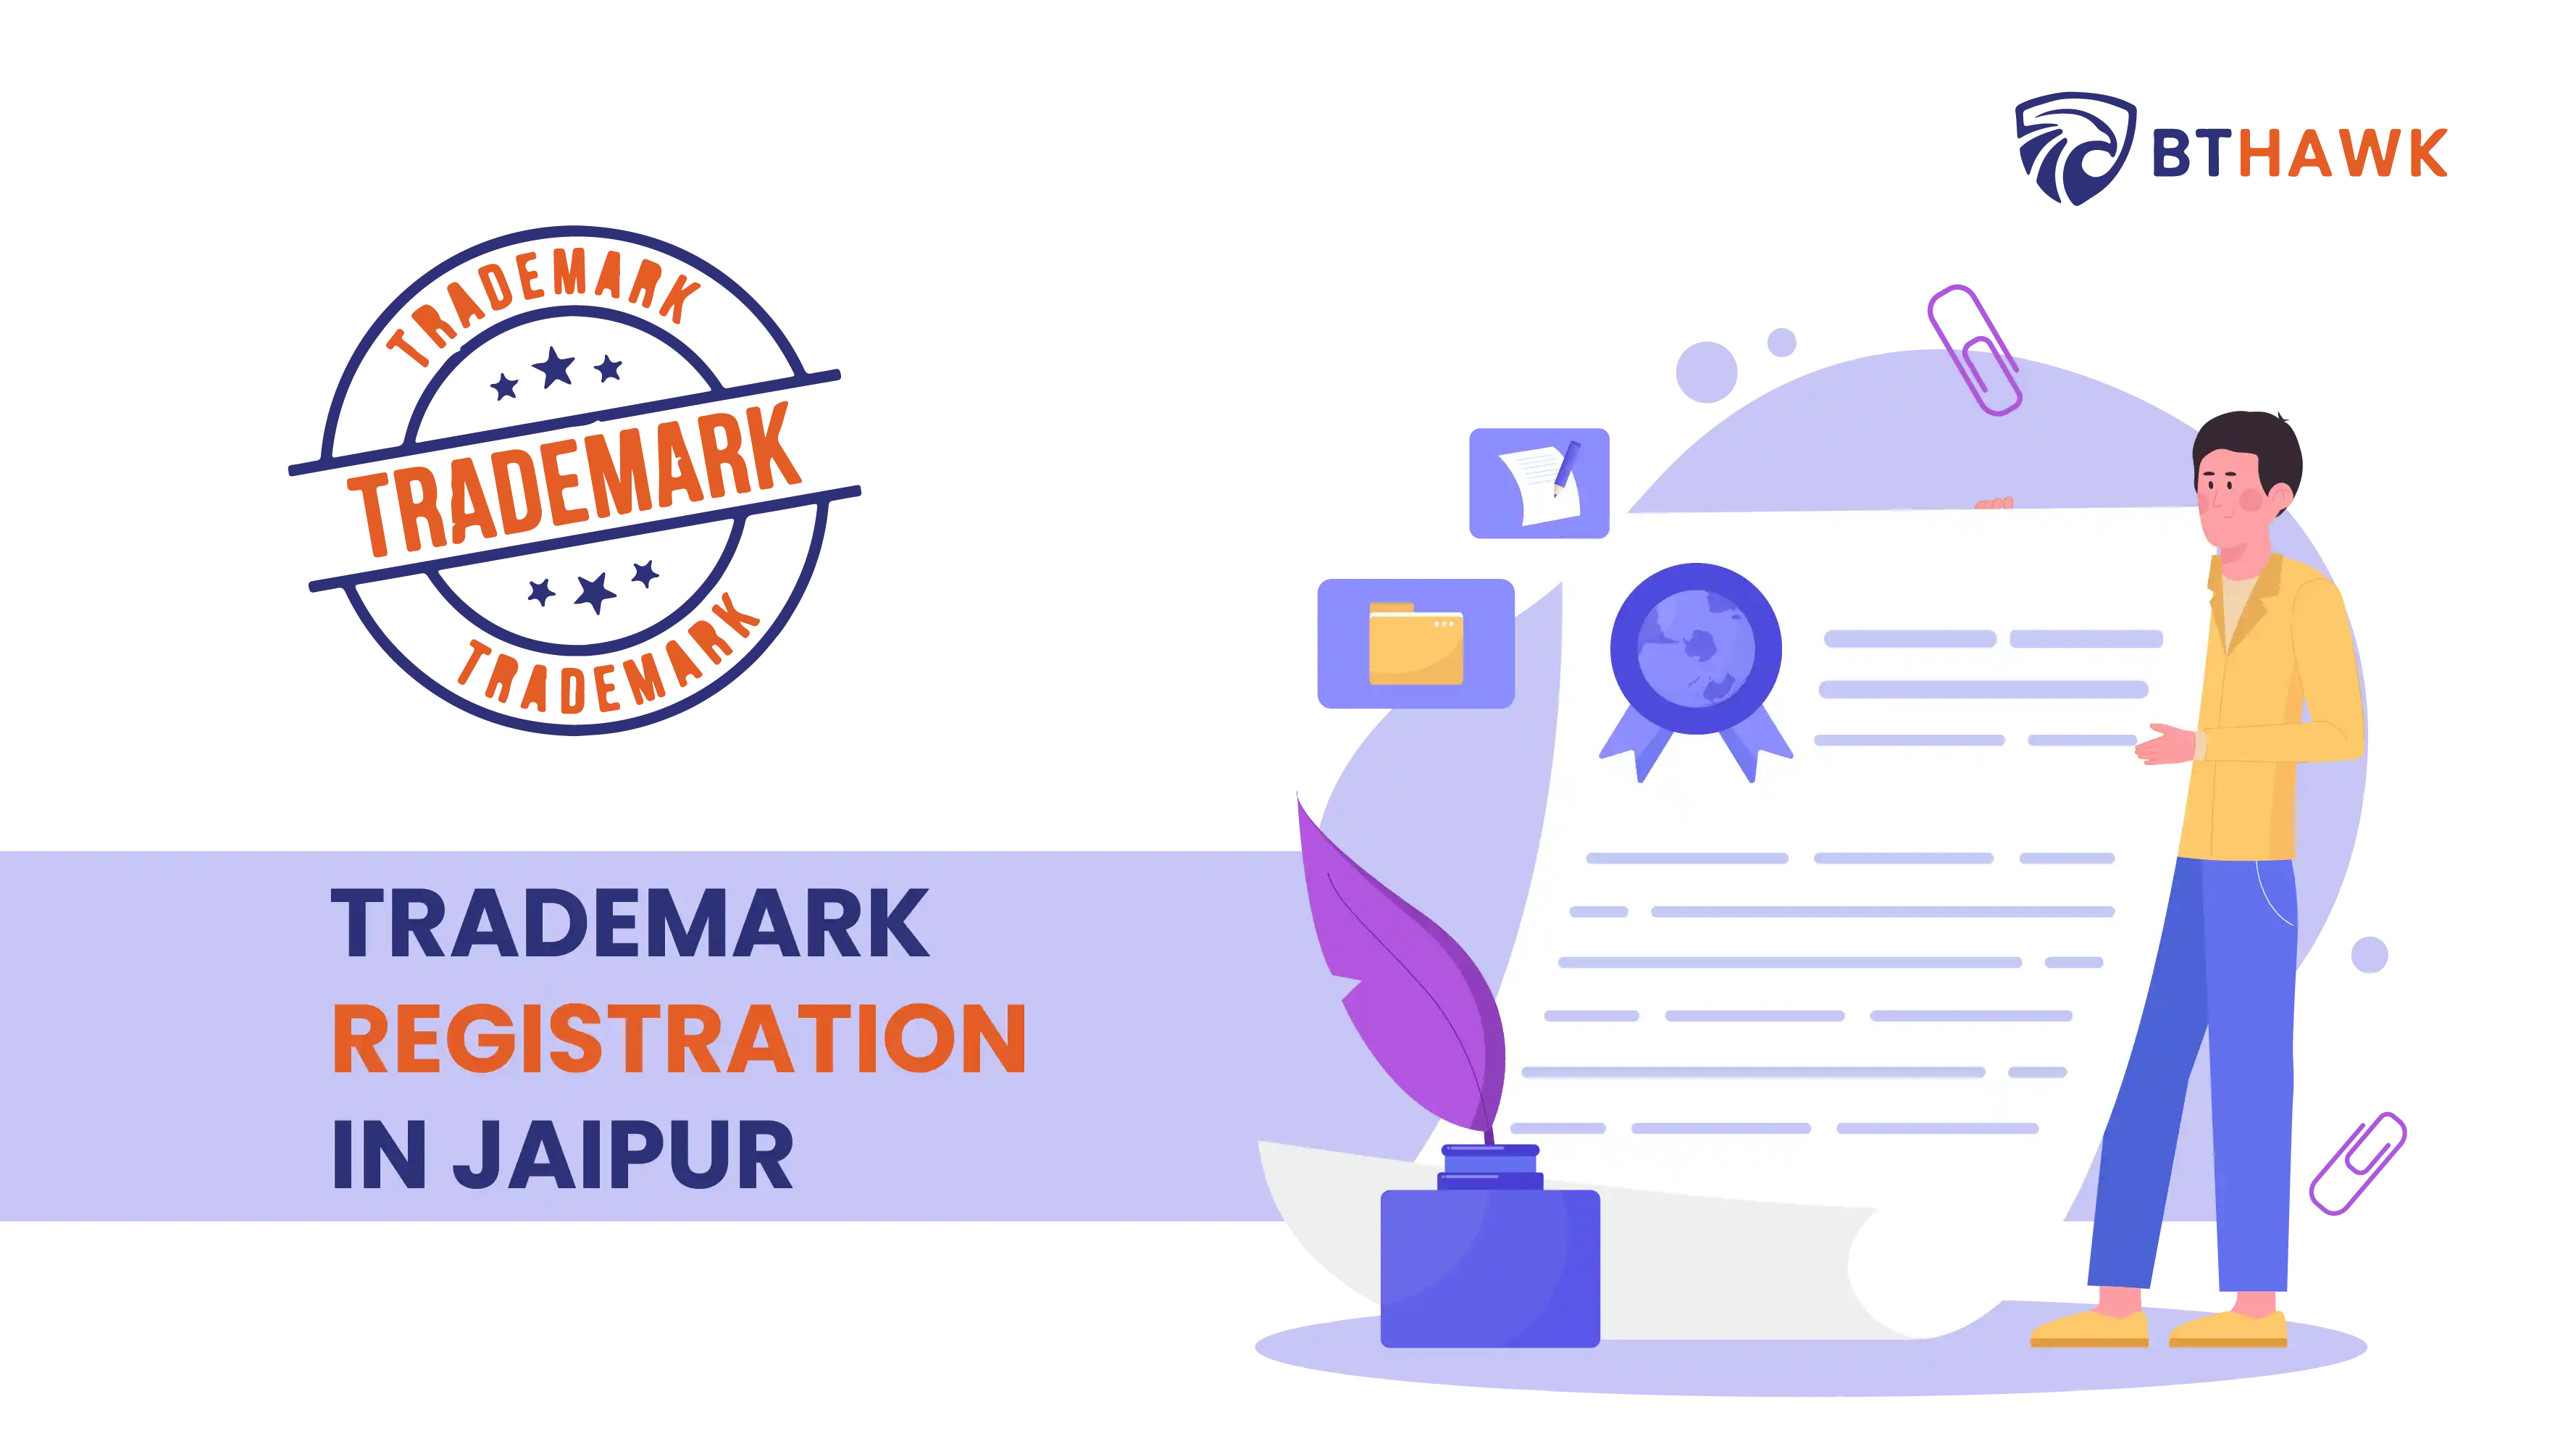    guide-trademark-registration-jaipur-protect-your-brand-legal-expertise-1717065748